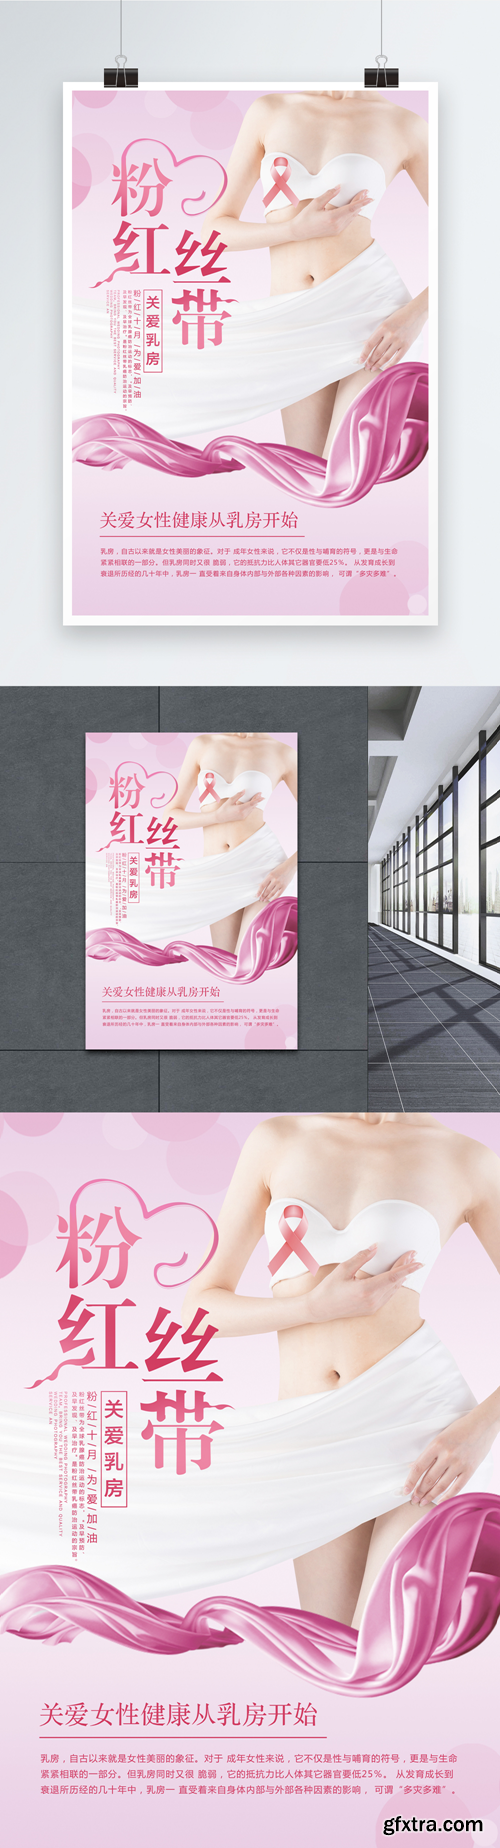 pink care for breast stereoscopic poster